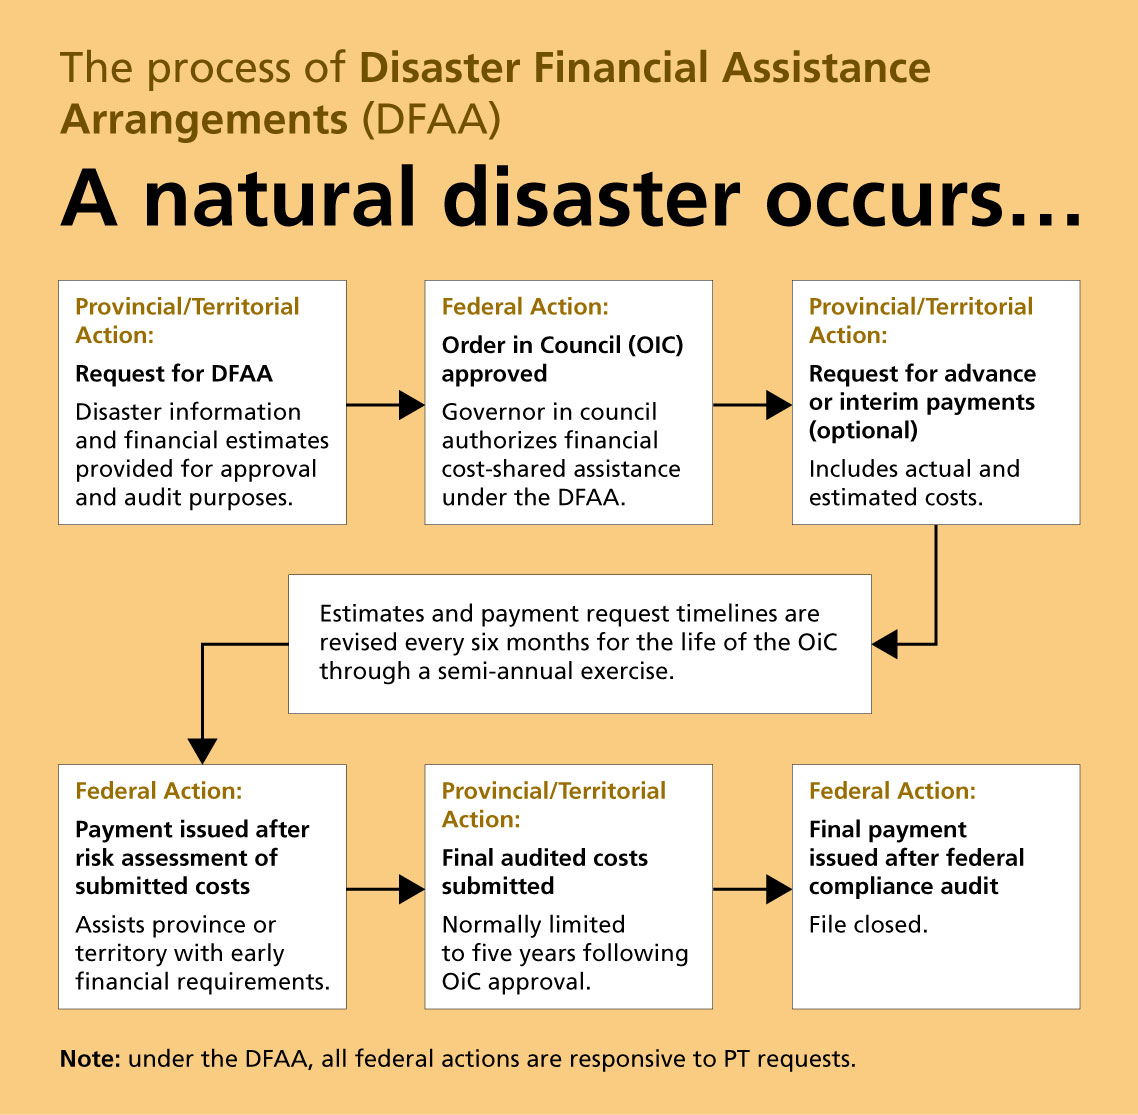 Flow chart of the process of Disaster Financial Assistance Arrangements (DFAA)